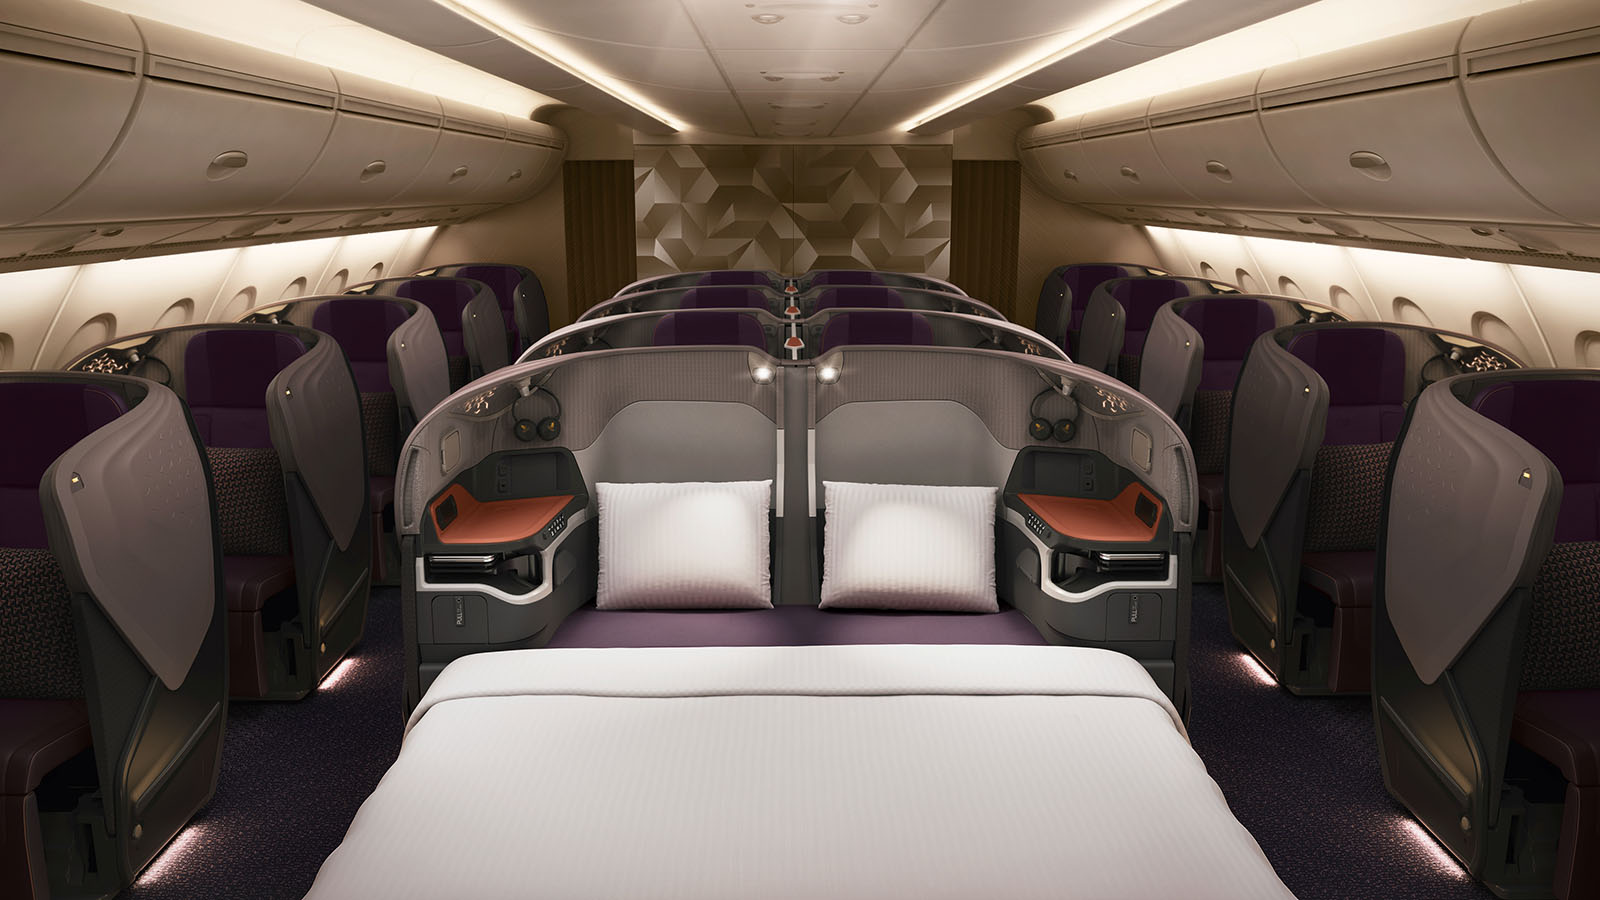 Singapore Airlines Airbus A380 Business Class